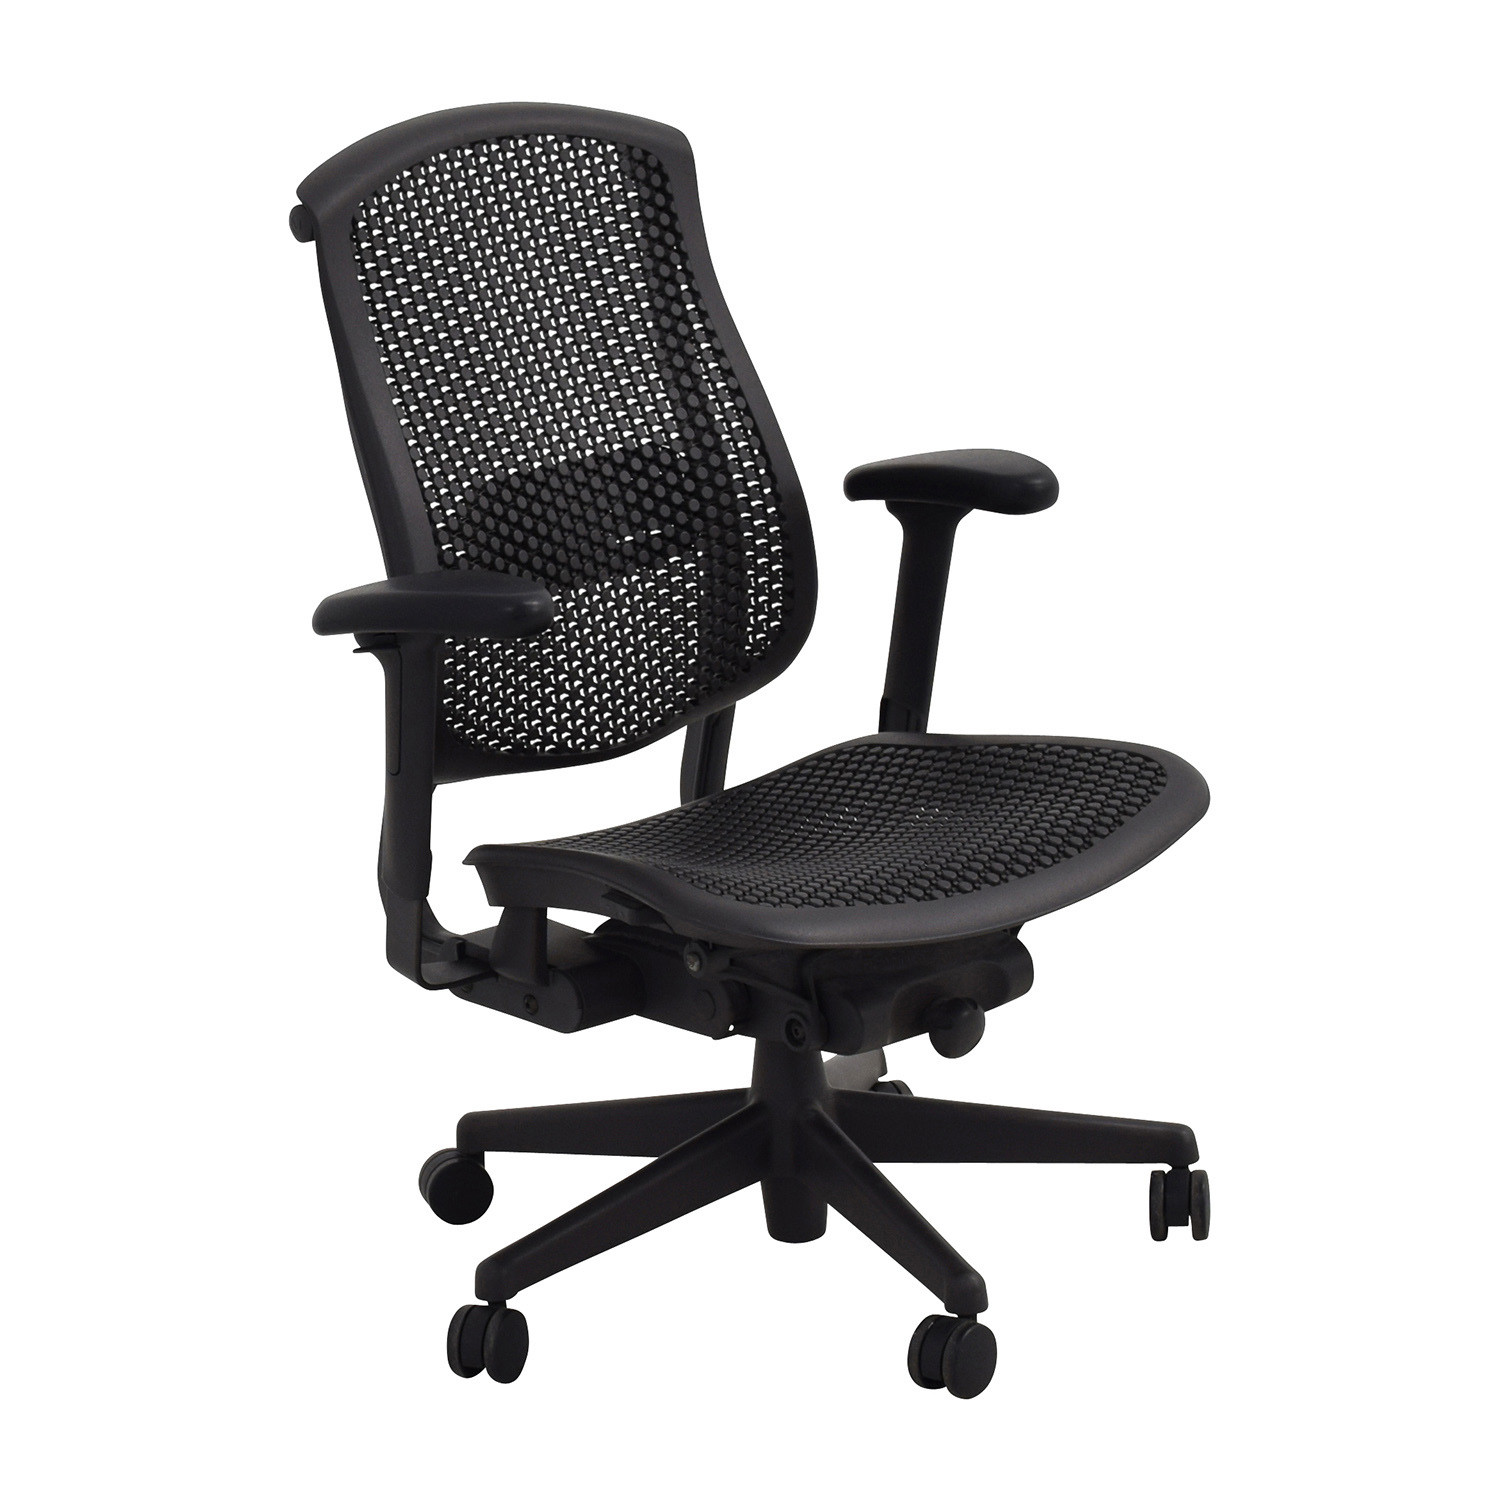 Best ideas about Office Desk Chair
. Save or Pin OFF Herman Miller Herman Miller Biomorph Ergonomic Now.